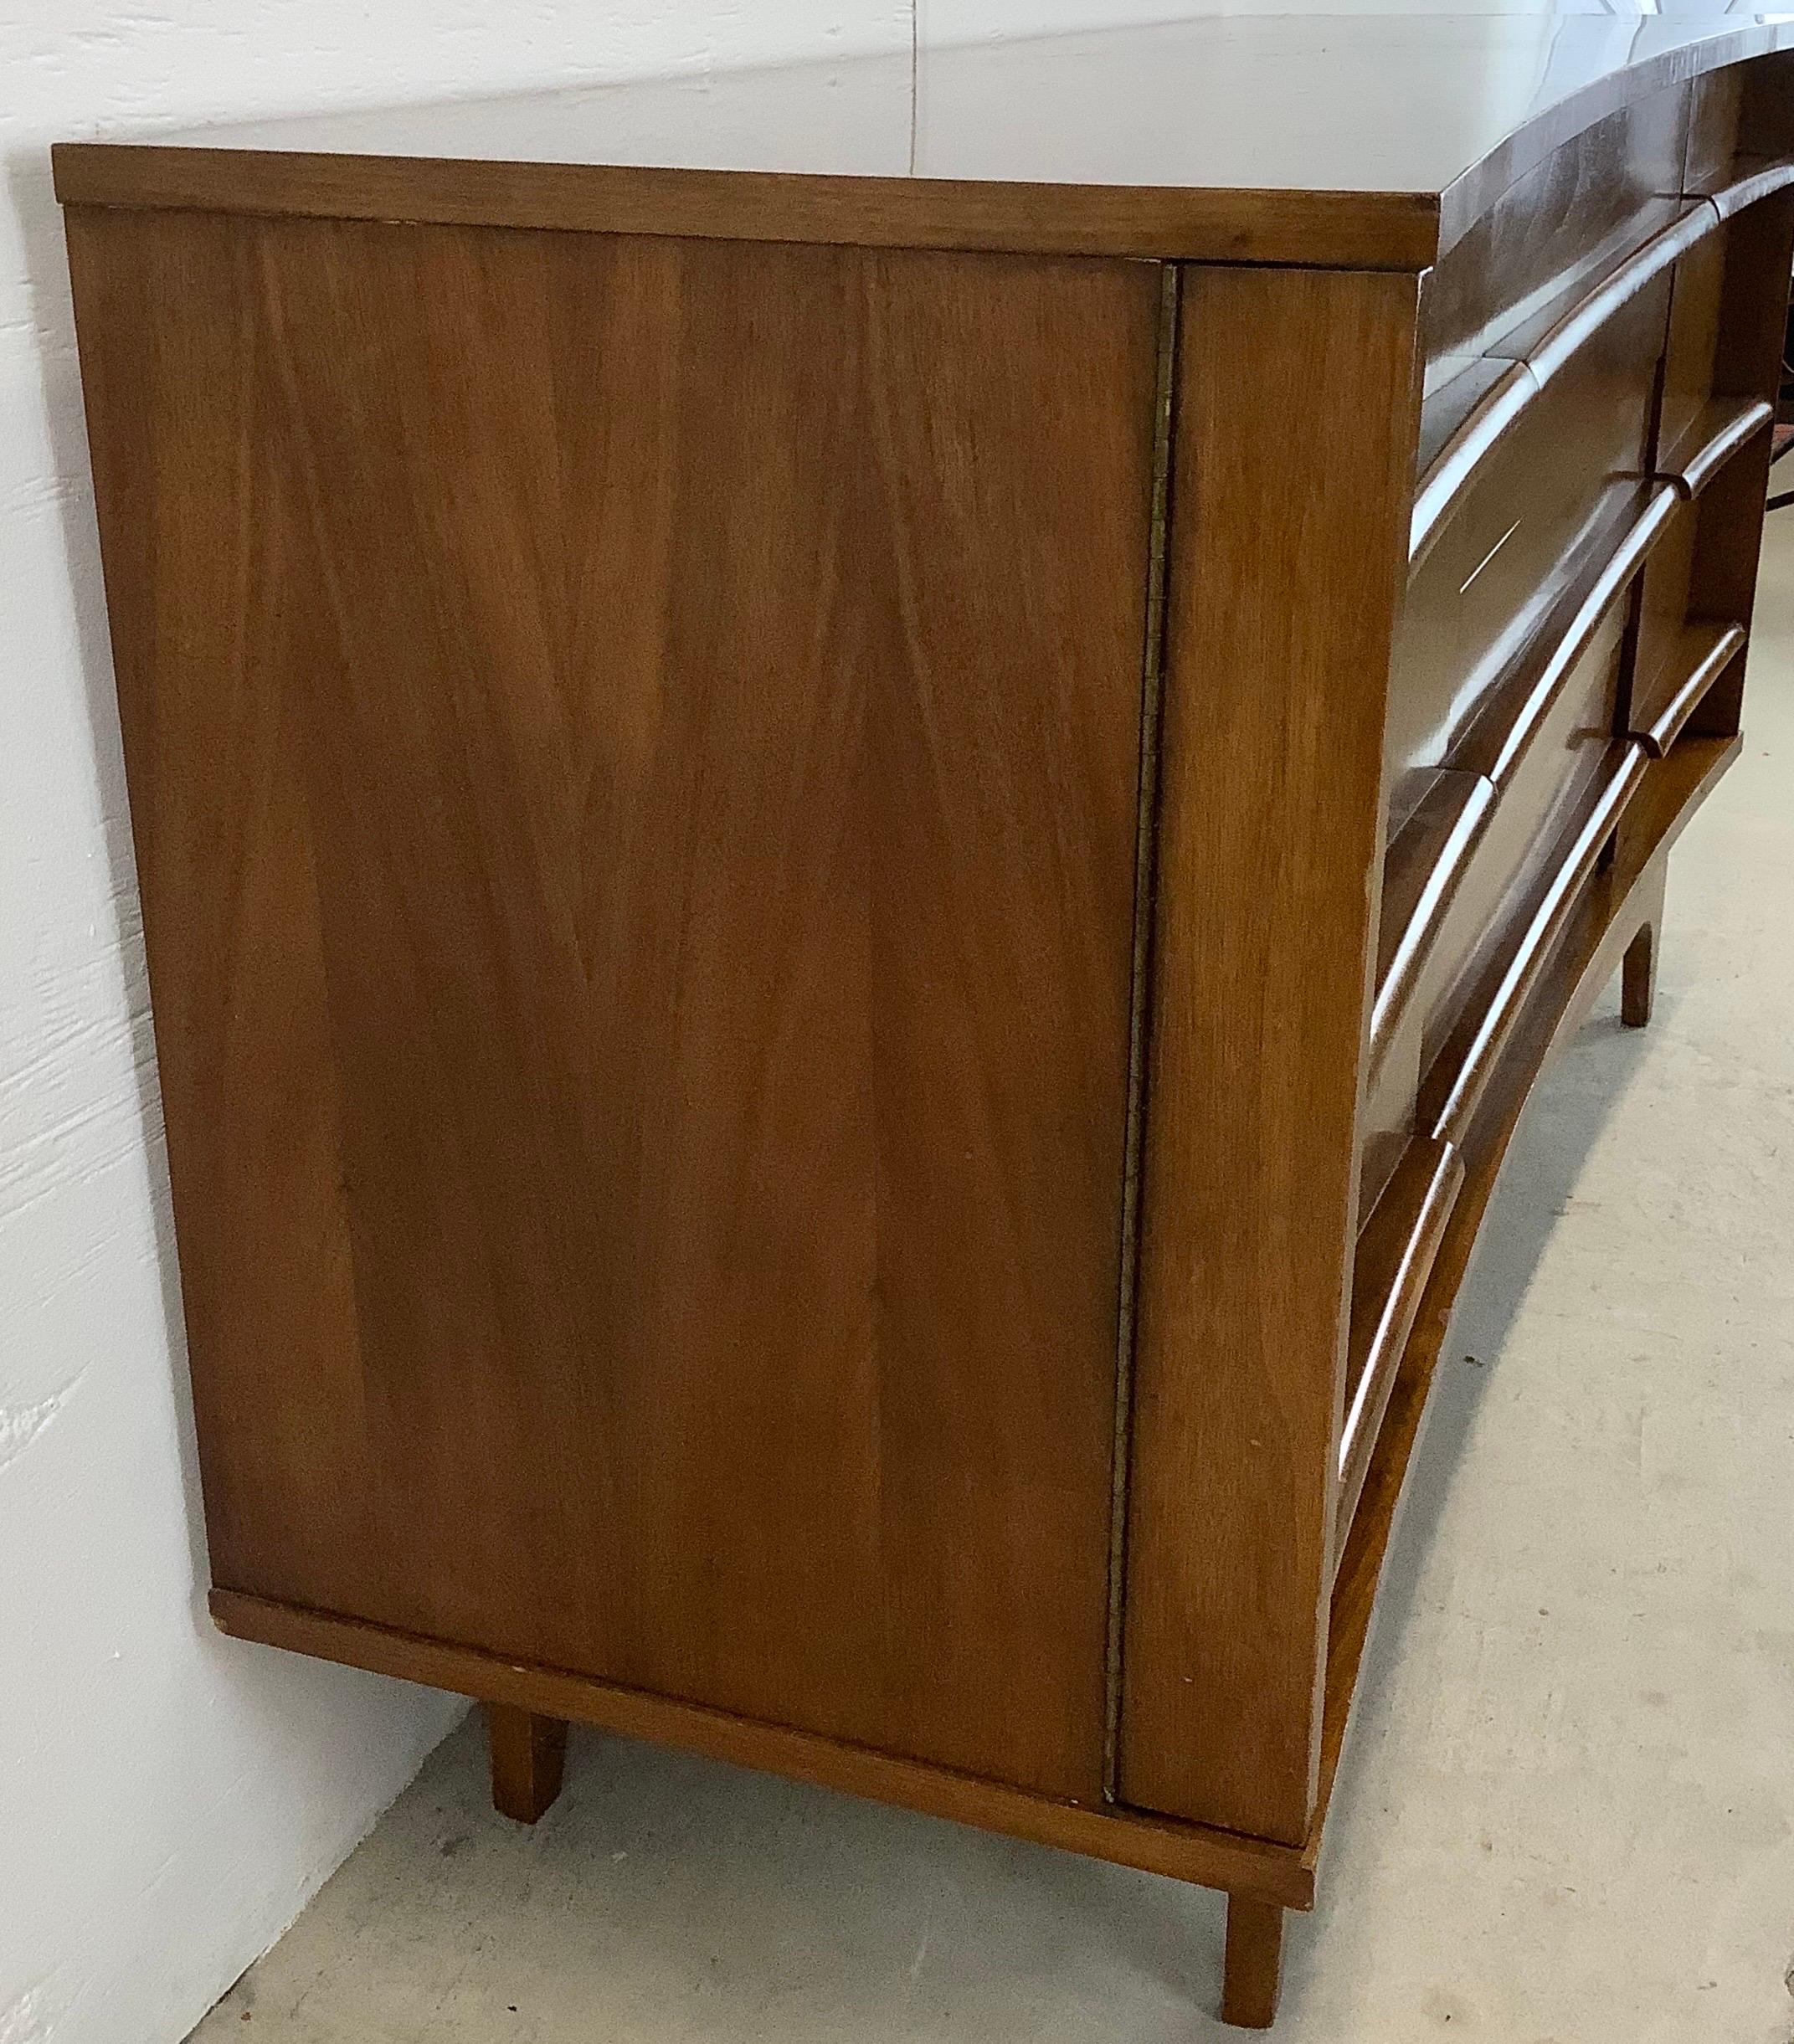 20th Century Mid-Century Walnut Bow Front Credenza by Young Mfg